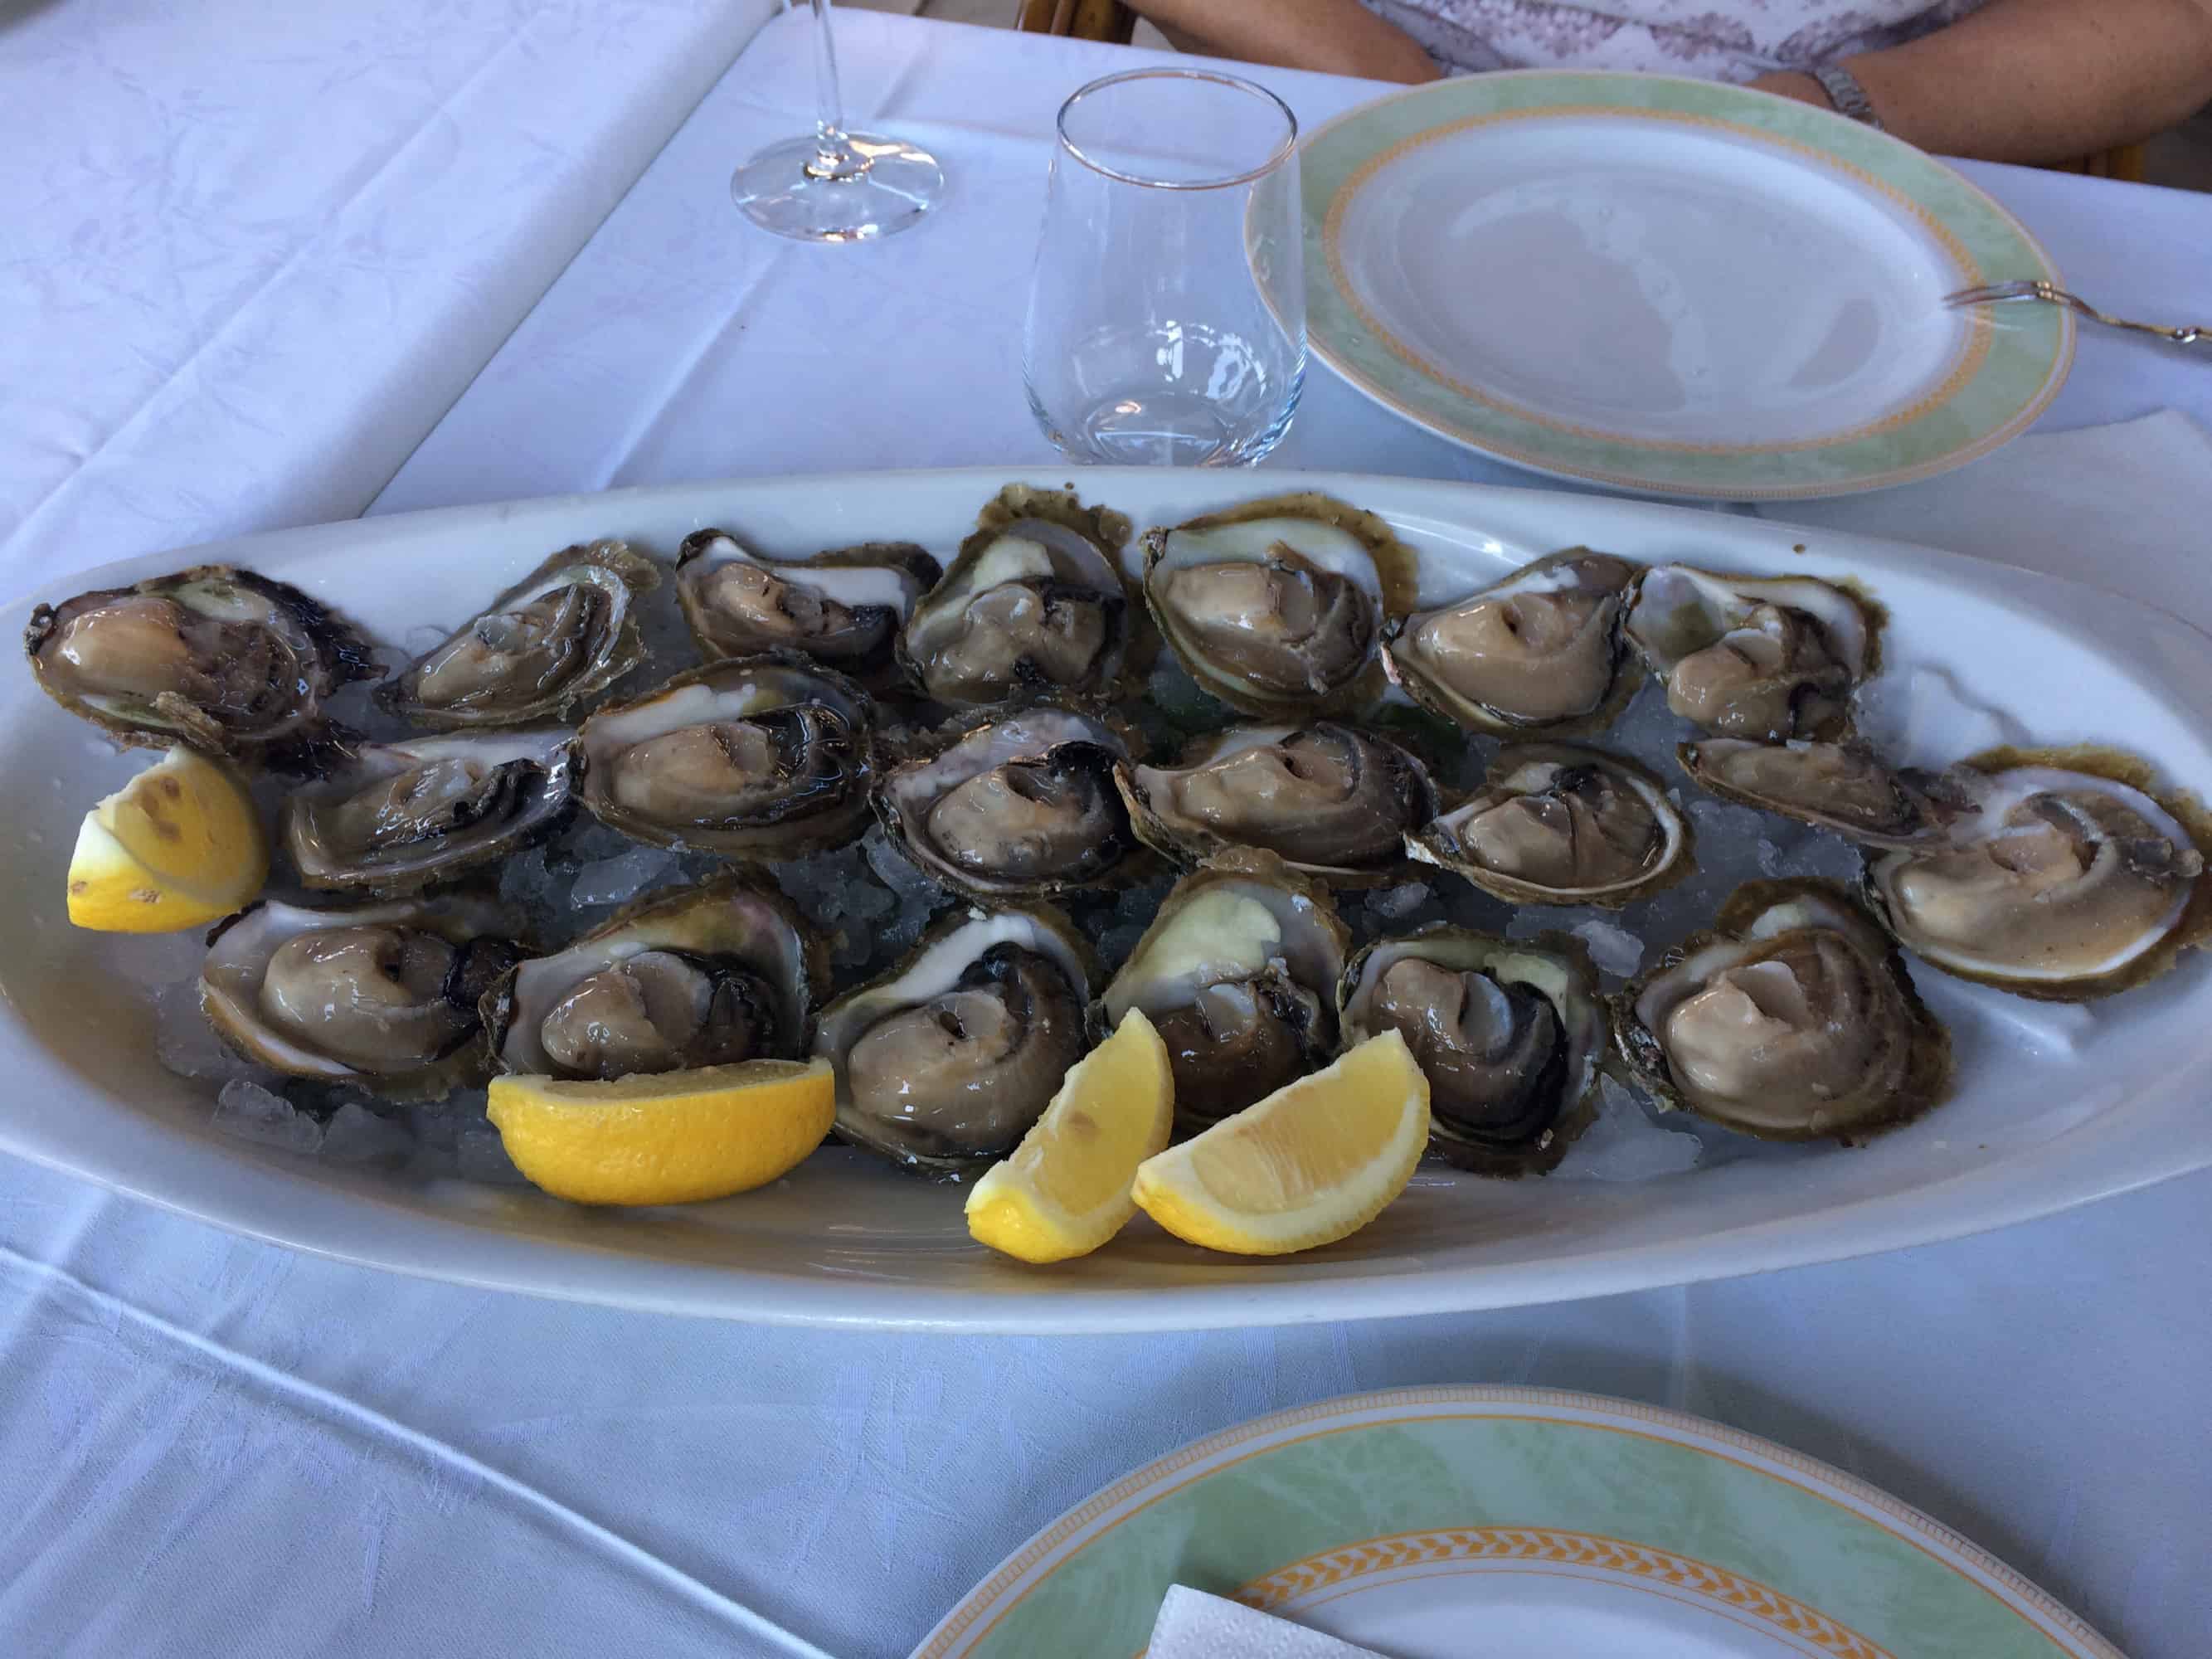 https://dubrovniktaxi.net/private-excursions-tours/ston-peljesac-vineyards-oysters/